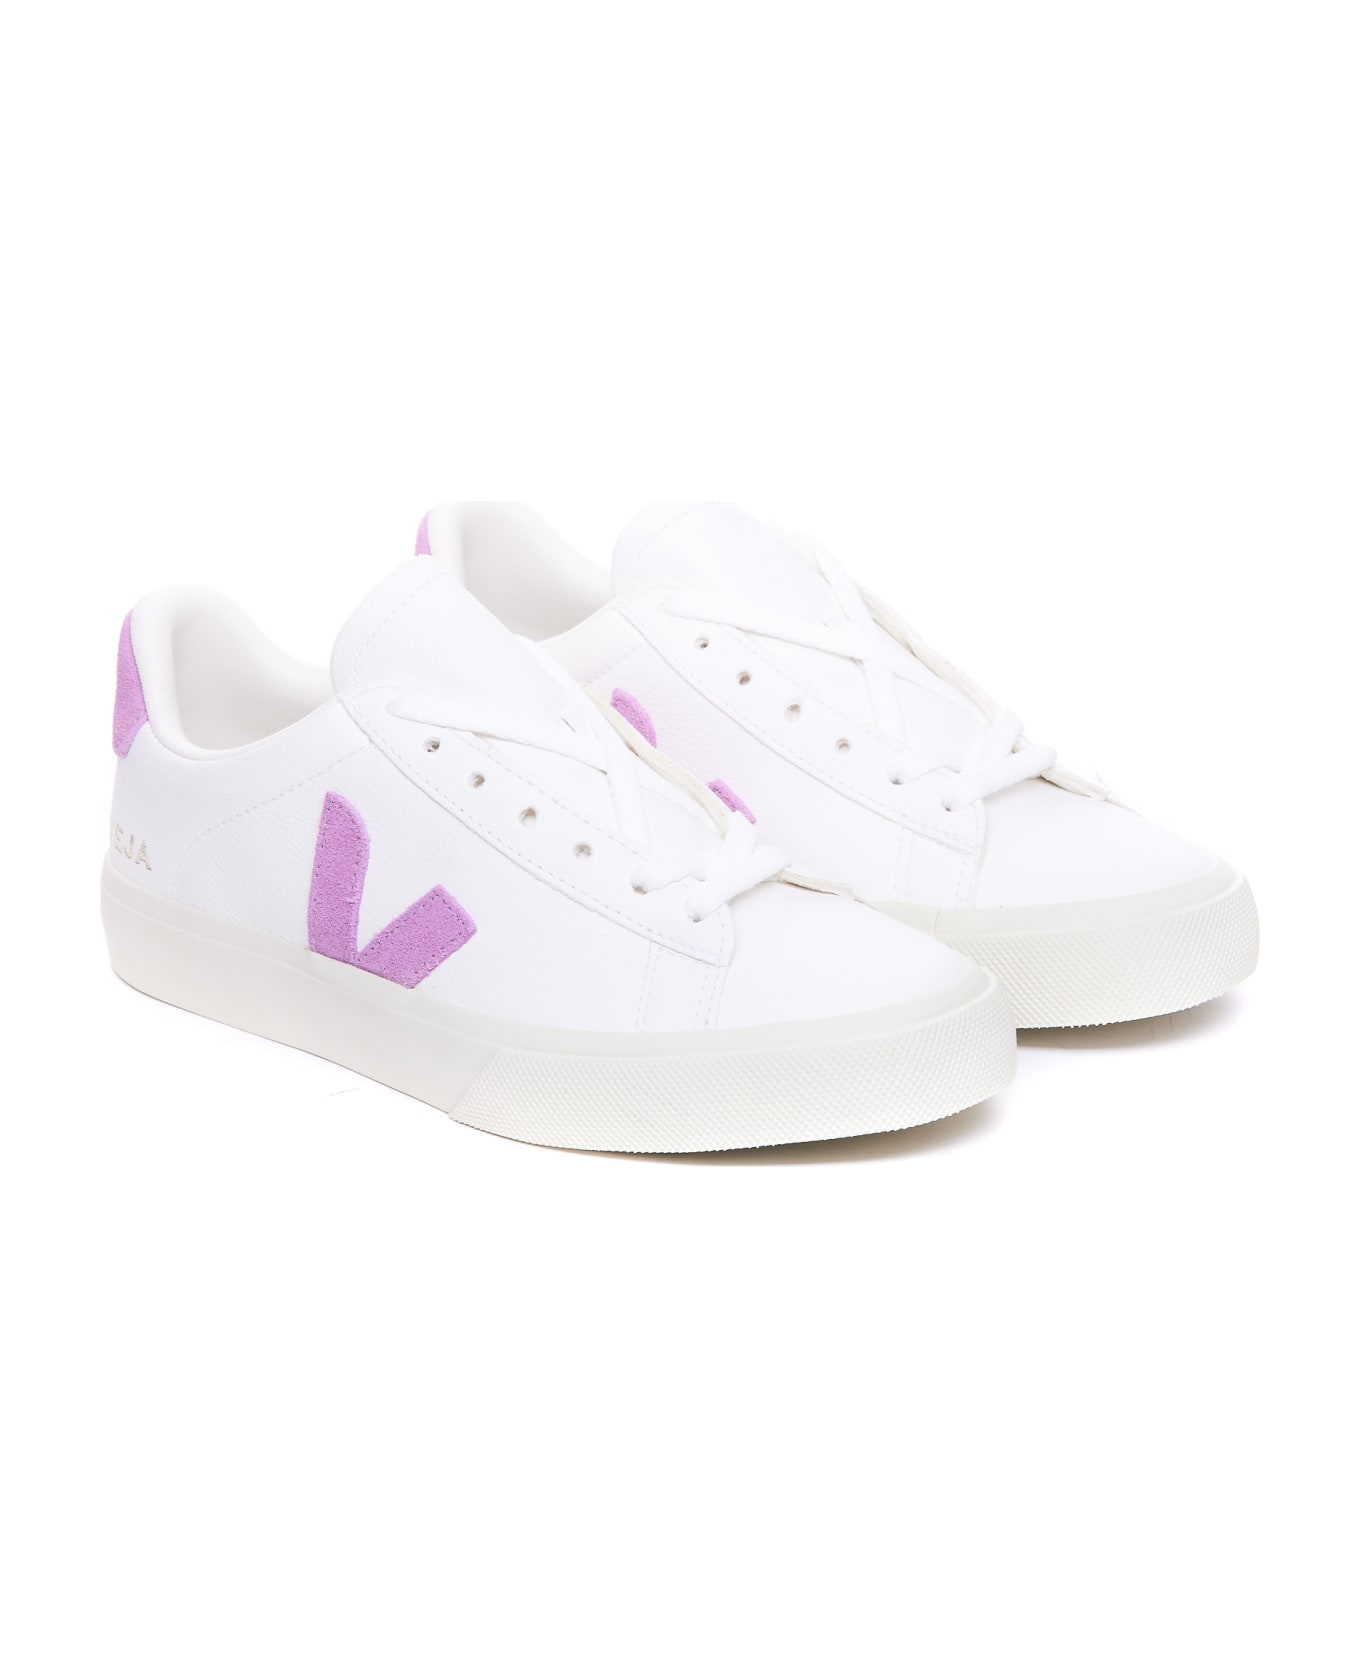 Veja Campo Sneakers - White スニーカー